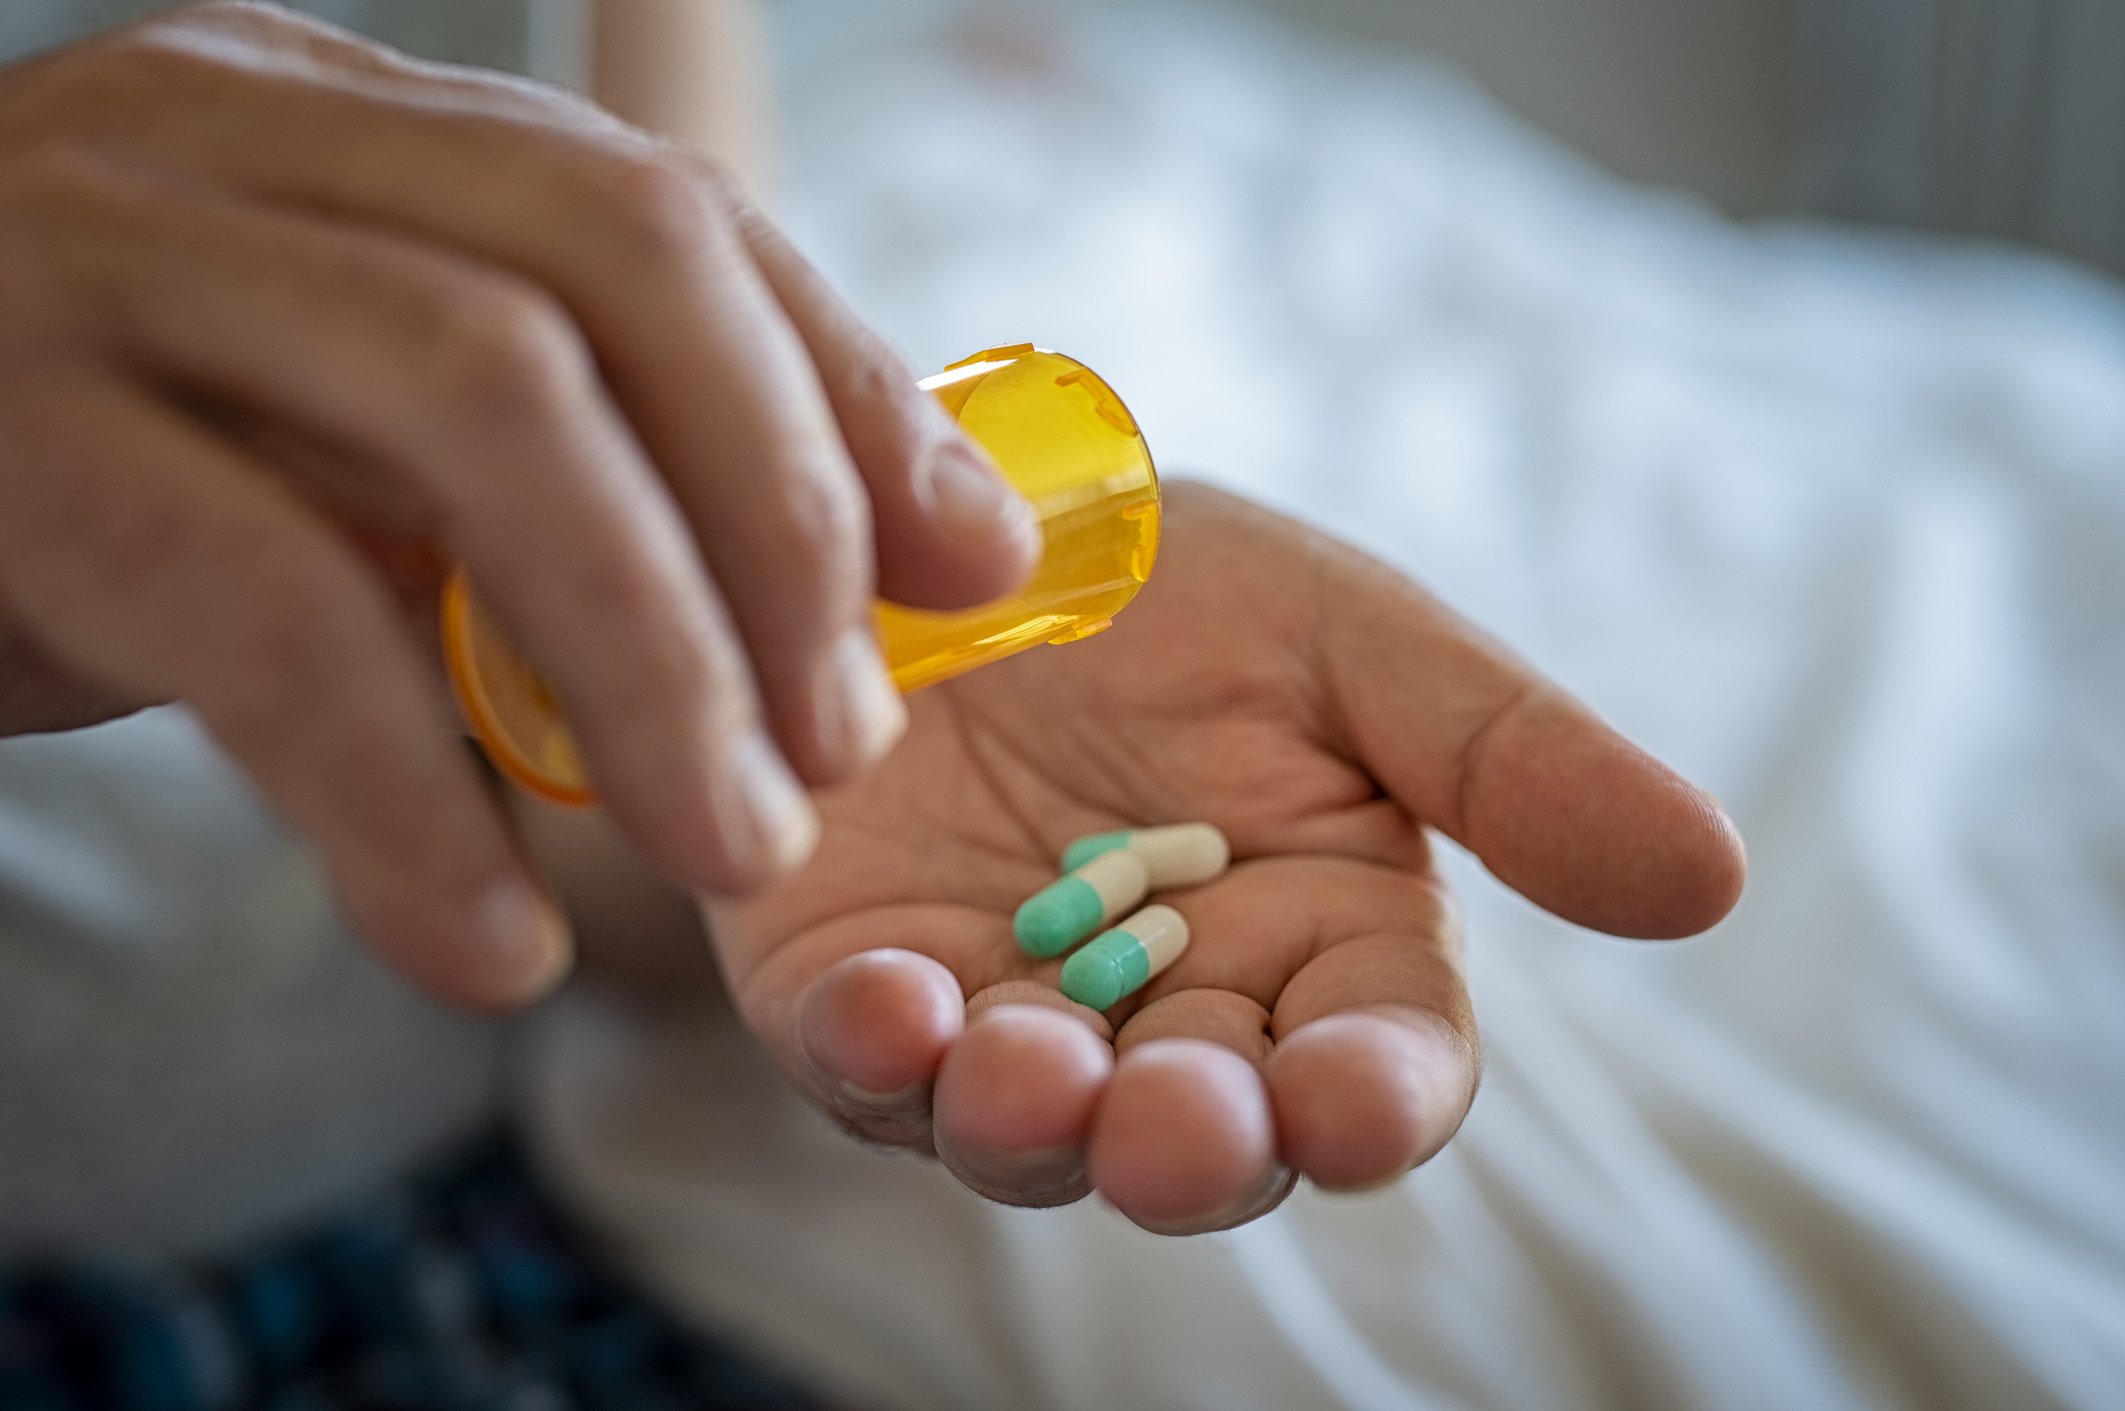 A person holding a pill bottle and a pill, indicating medication.